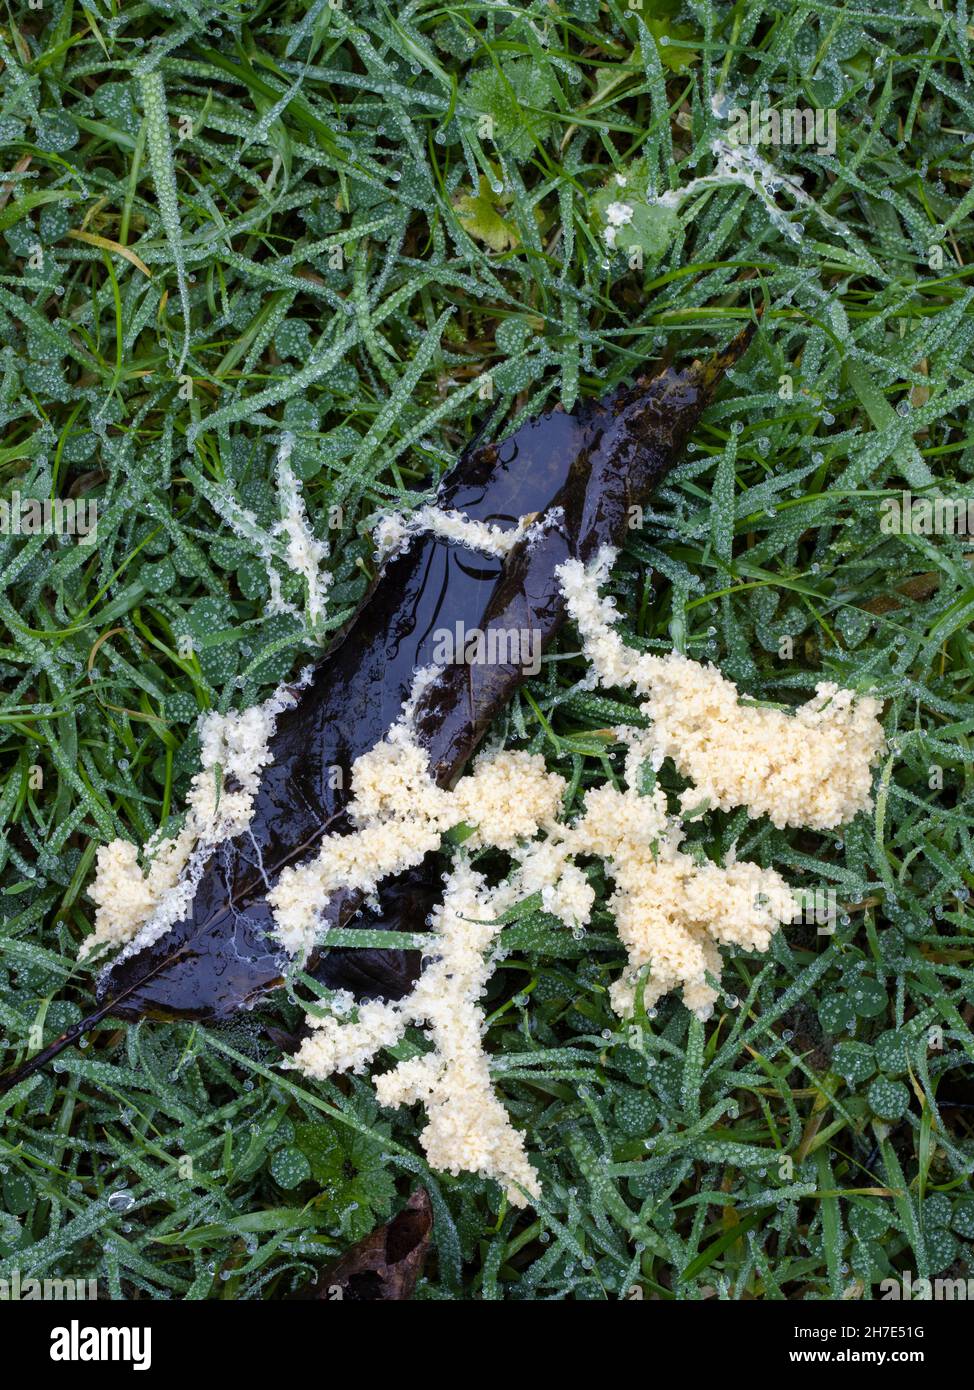 Mucilago crustacea slime mould mold growing on a wet lawn in England in autumn Stock Photo